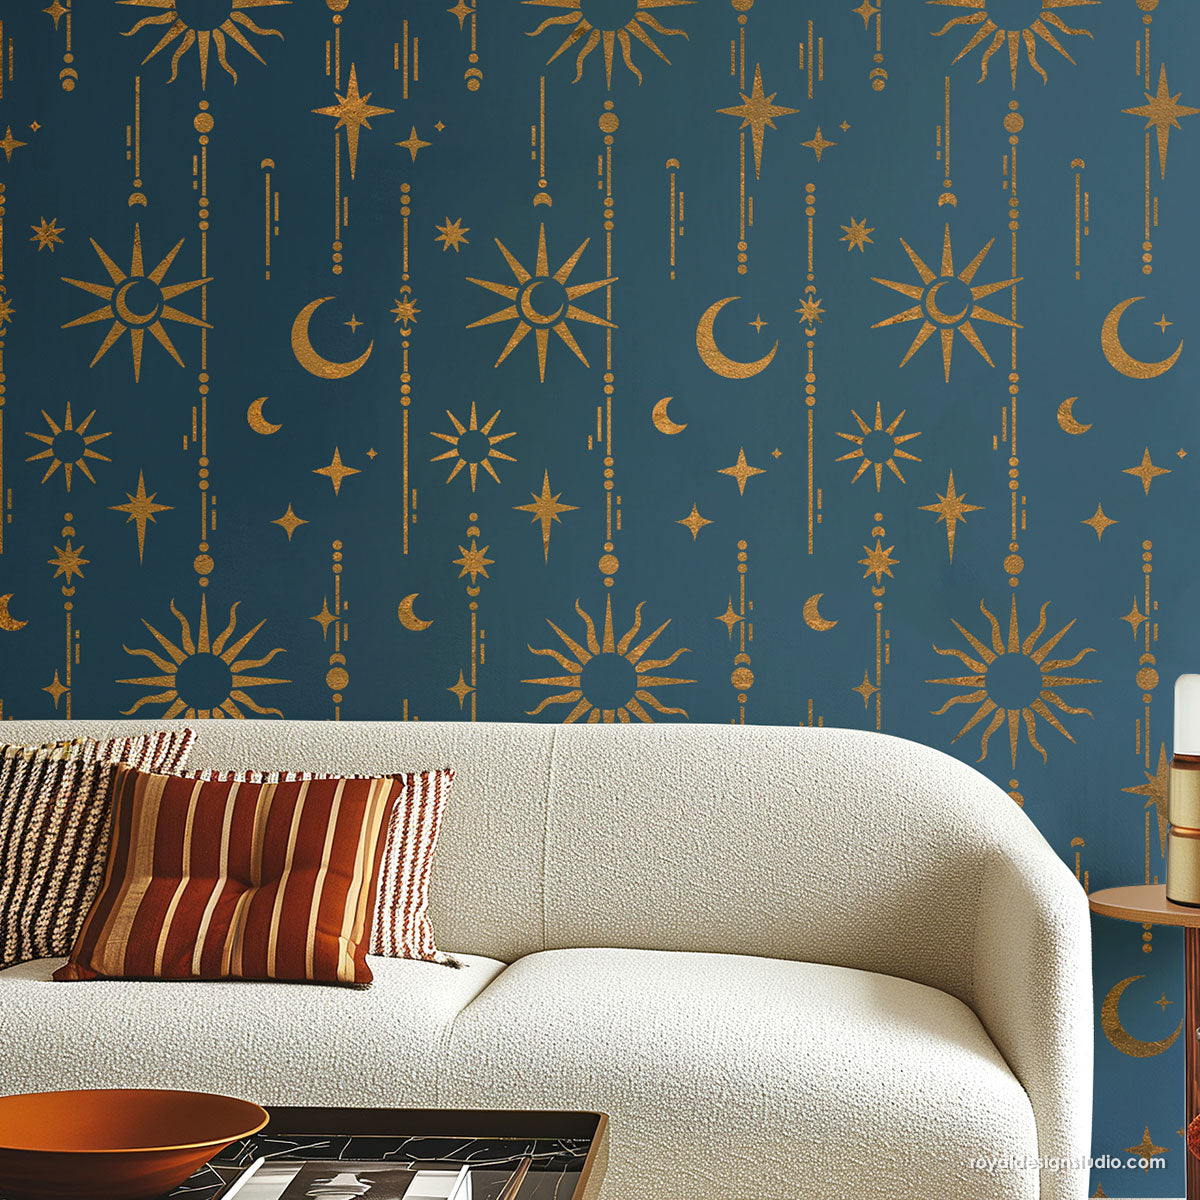 Celestial moon and stars allover wall stencil for wallpaper painting